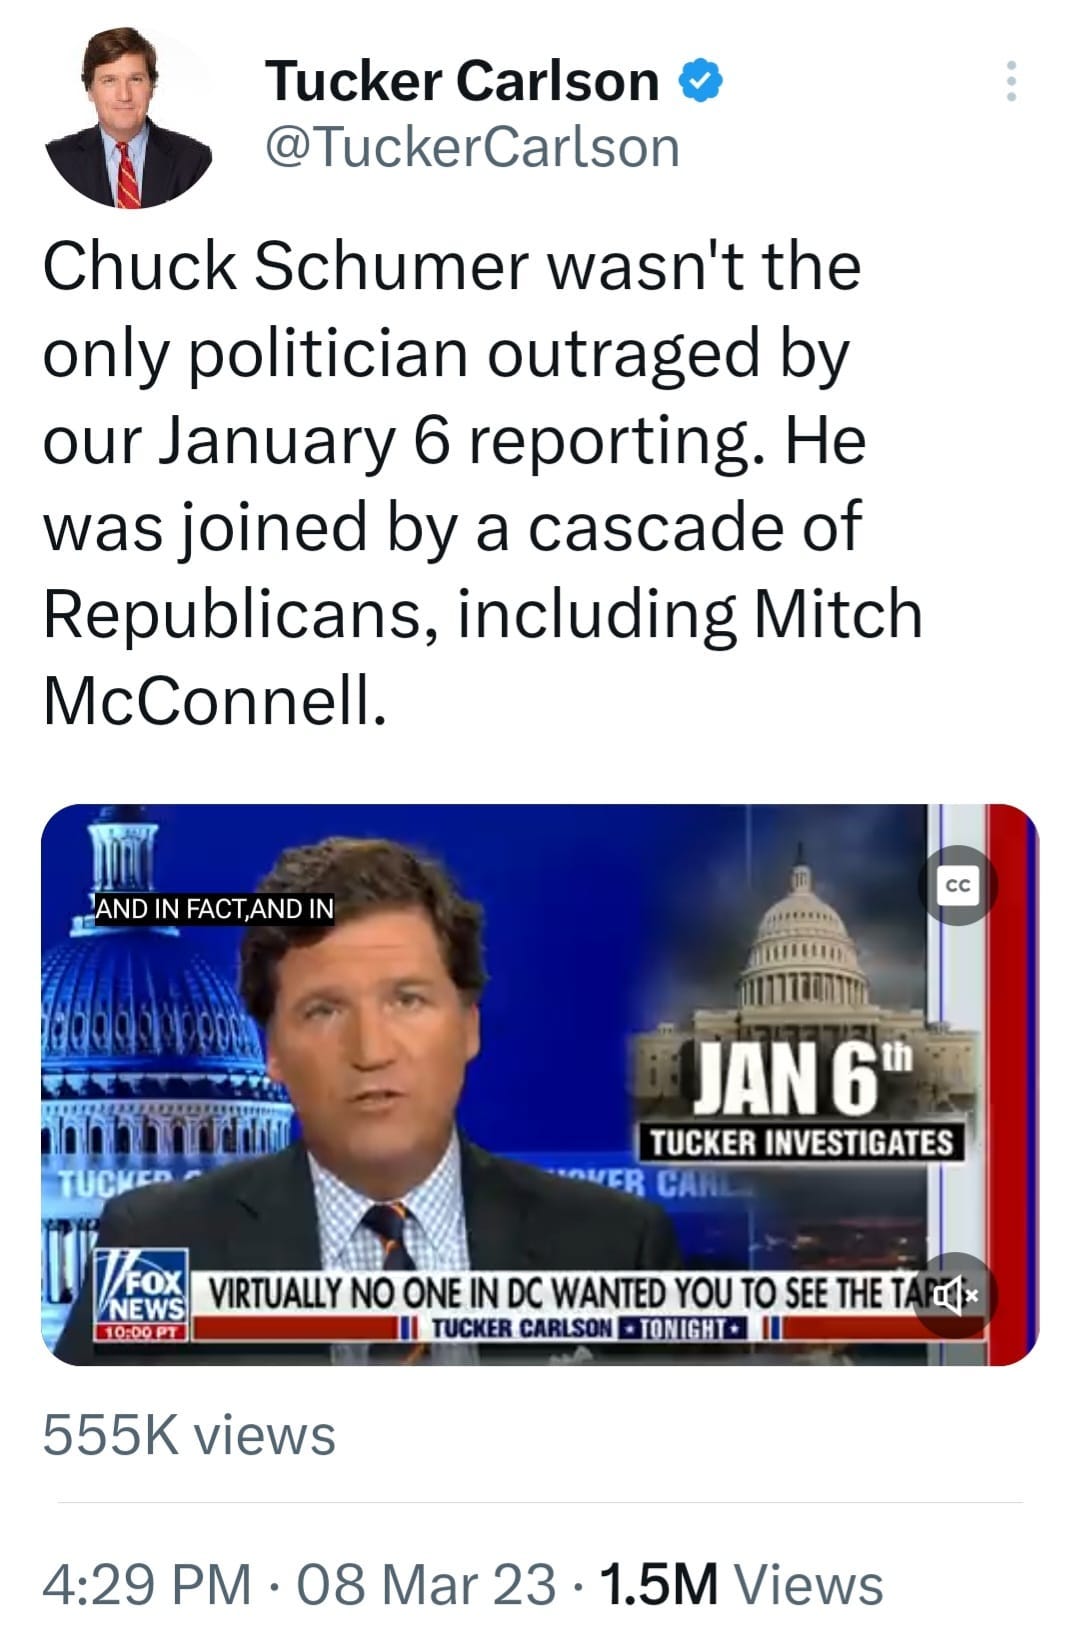 May be a Twitter screenshot of 2 people and text that says 'Tucker Carlson @TuckerCarlson Chuck Schumer wasn't the only politician outraged by our January 6 reporting. He was joined by a cascade of Republicans including Mitch McConnell. AND IN FACT,AND IN CC TUCKED JAN 6 TUCKER INVESTIGATES OUER NEWS VIRTUALLY NO ONE INDC IN WANTED YOU το SEE THETA 4 10:00PT TUCKER CARLSON TONIGHT 555K views 4:29 PM 08 Mar 23 1.5M Views'